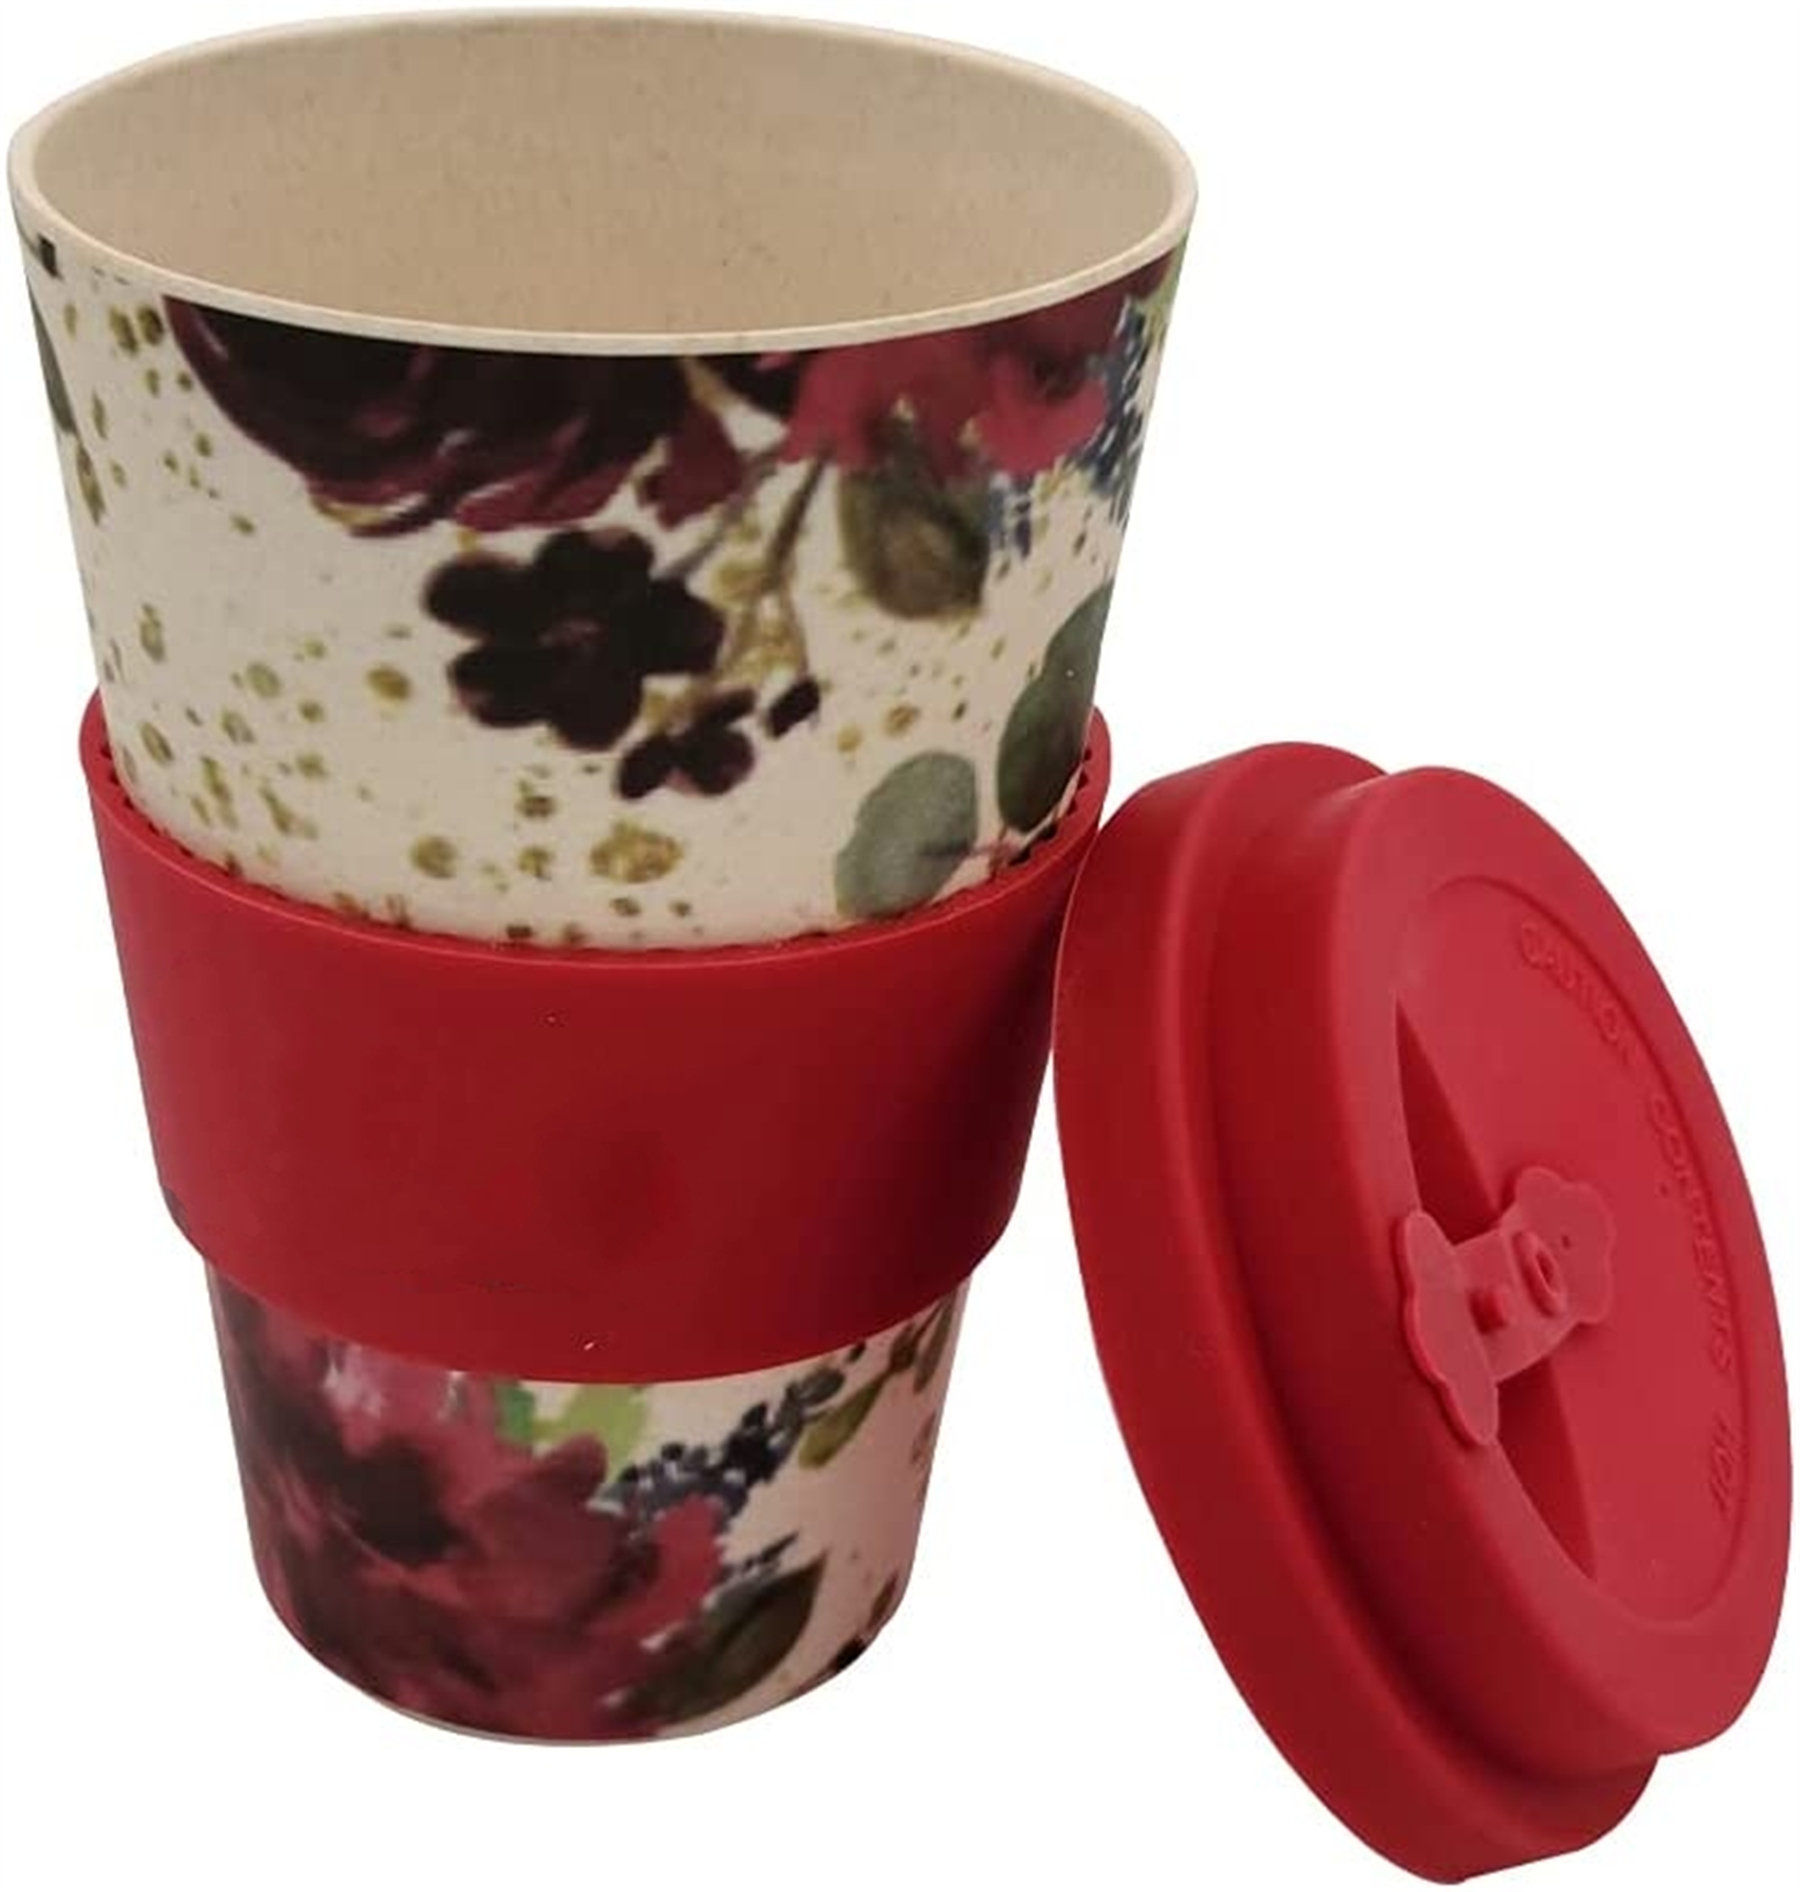 Emptiness Digestive organ Seduce NKJUNEER Eco-Friendly Bamboo Cup Natural Organic Bamboo Fiber Travel Mug,  Reusable Coffee Cup, With Silicone Lid & Sleeve, With Rose Print, Bamboo  Travel Cup For Coffee Tea Or Milk. Pack Of 1